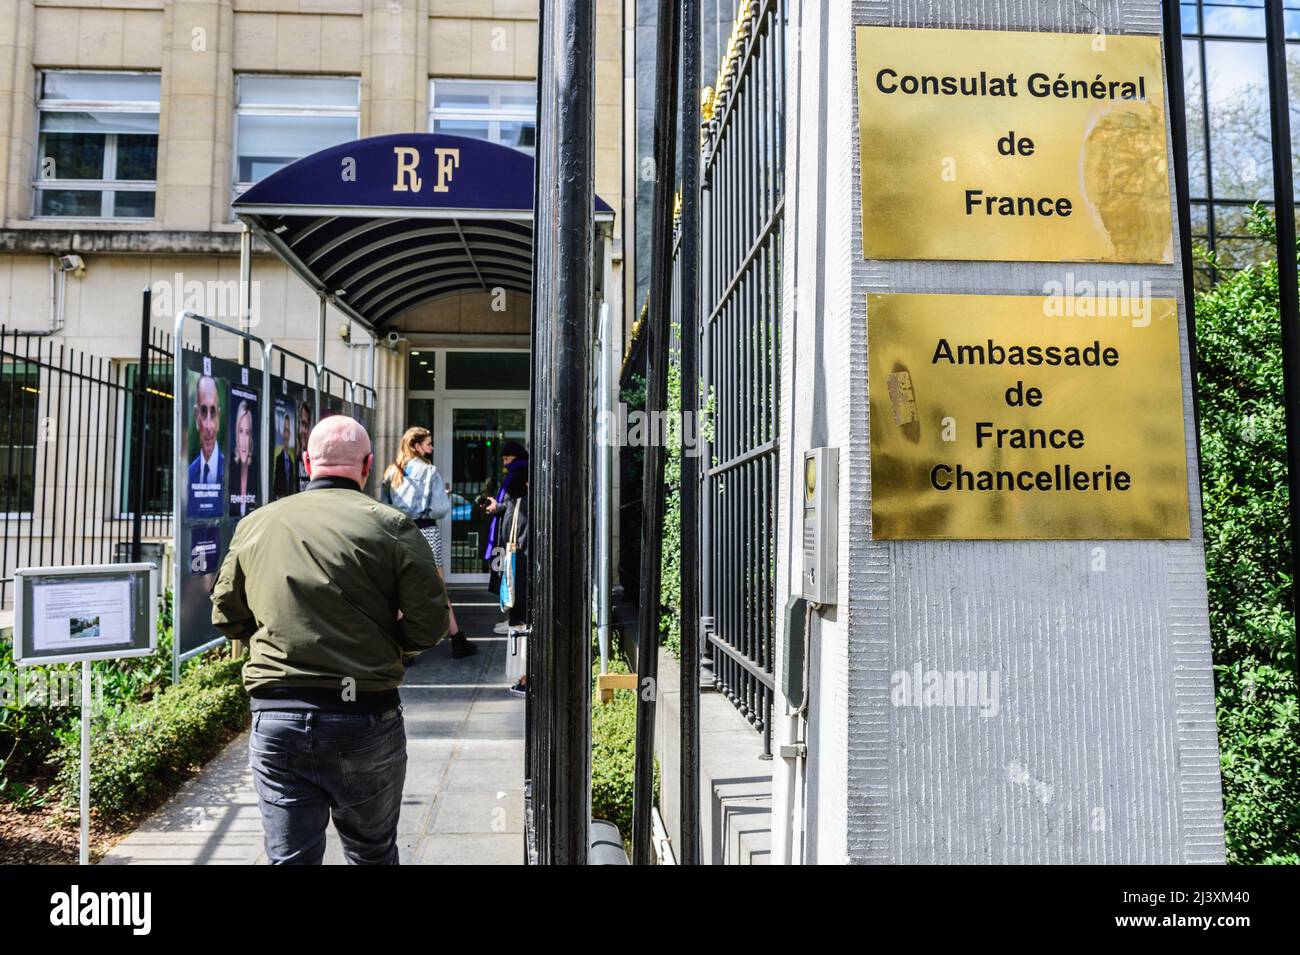 A polling station in the Brussels french consulate for the french election attract french people living in Saint-Josse to vote. | Des bureaux de votes Stock Photo